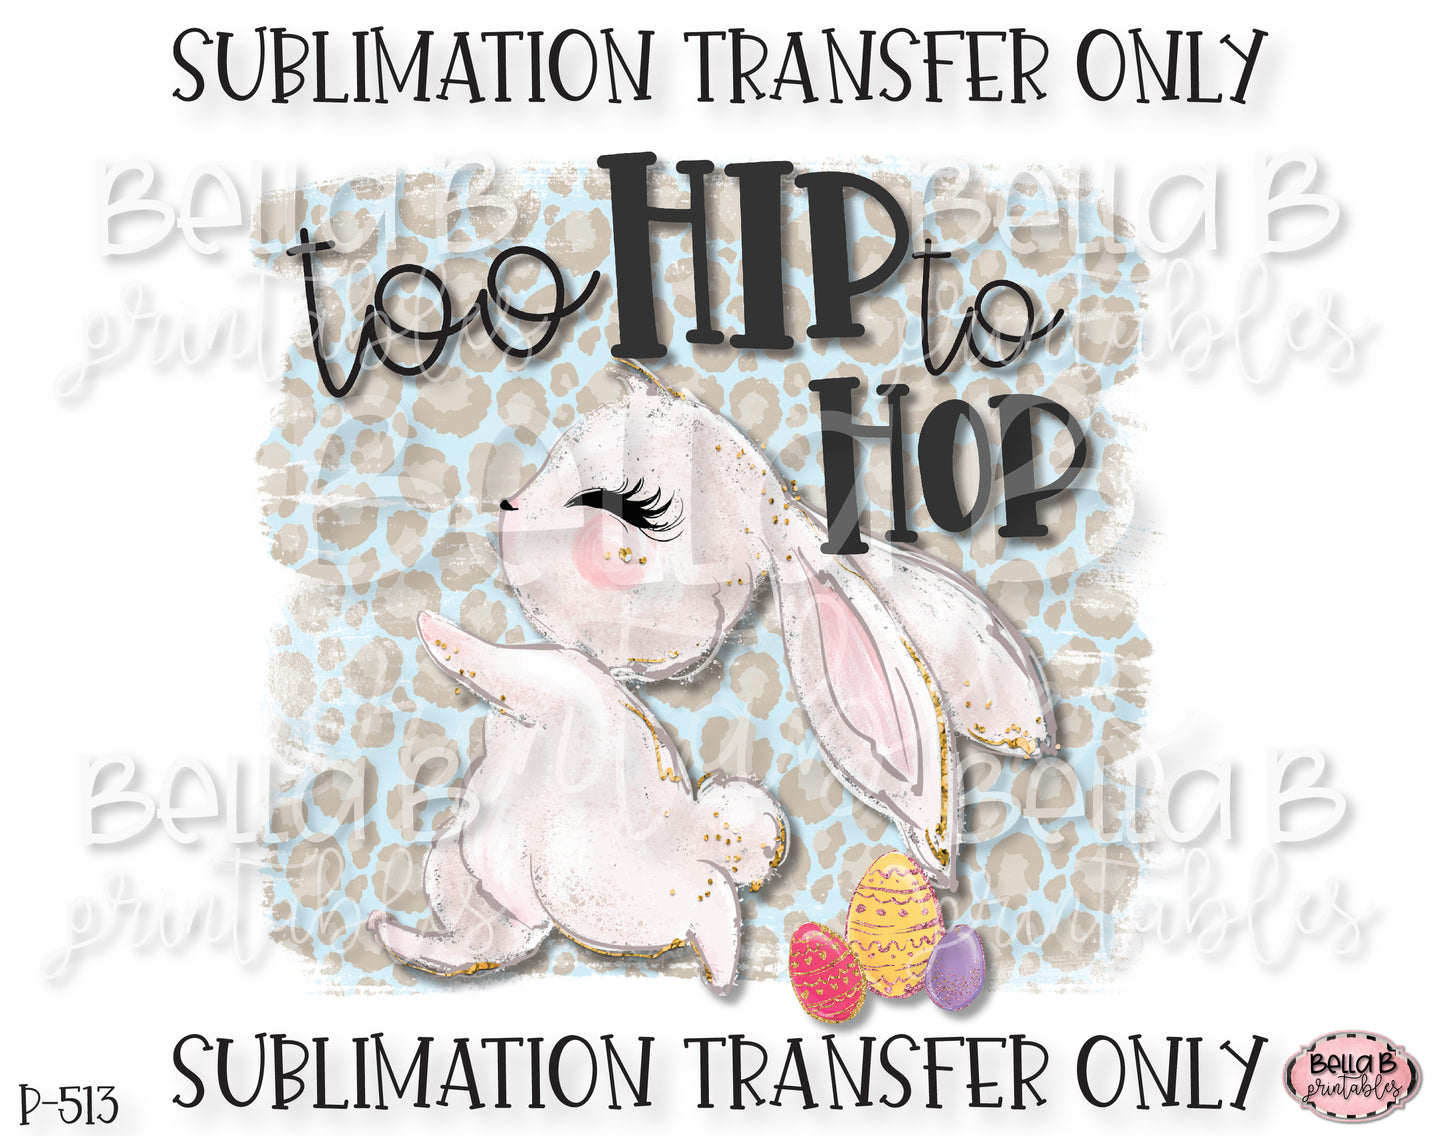 Easter Sublimation Transfer, Too Hip To Hop, Ready To Press, Heat Press Transfer, Sublimation Print